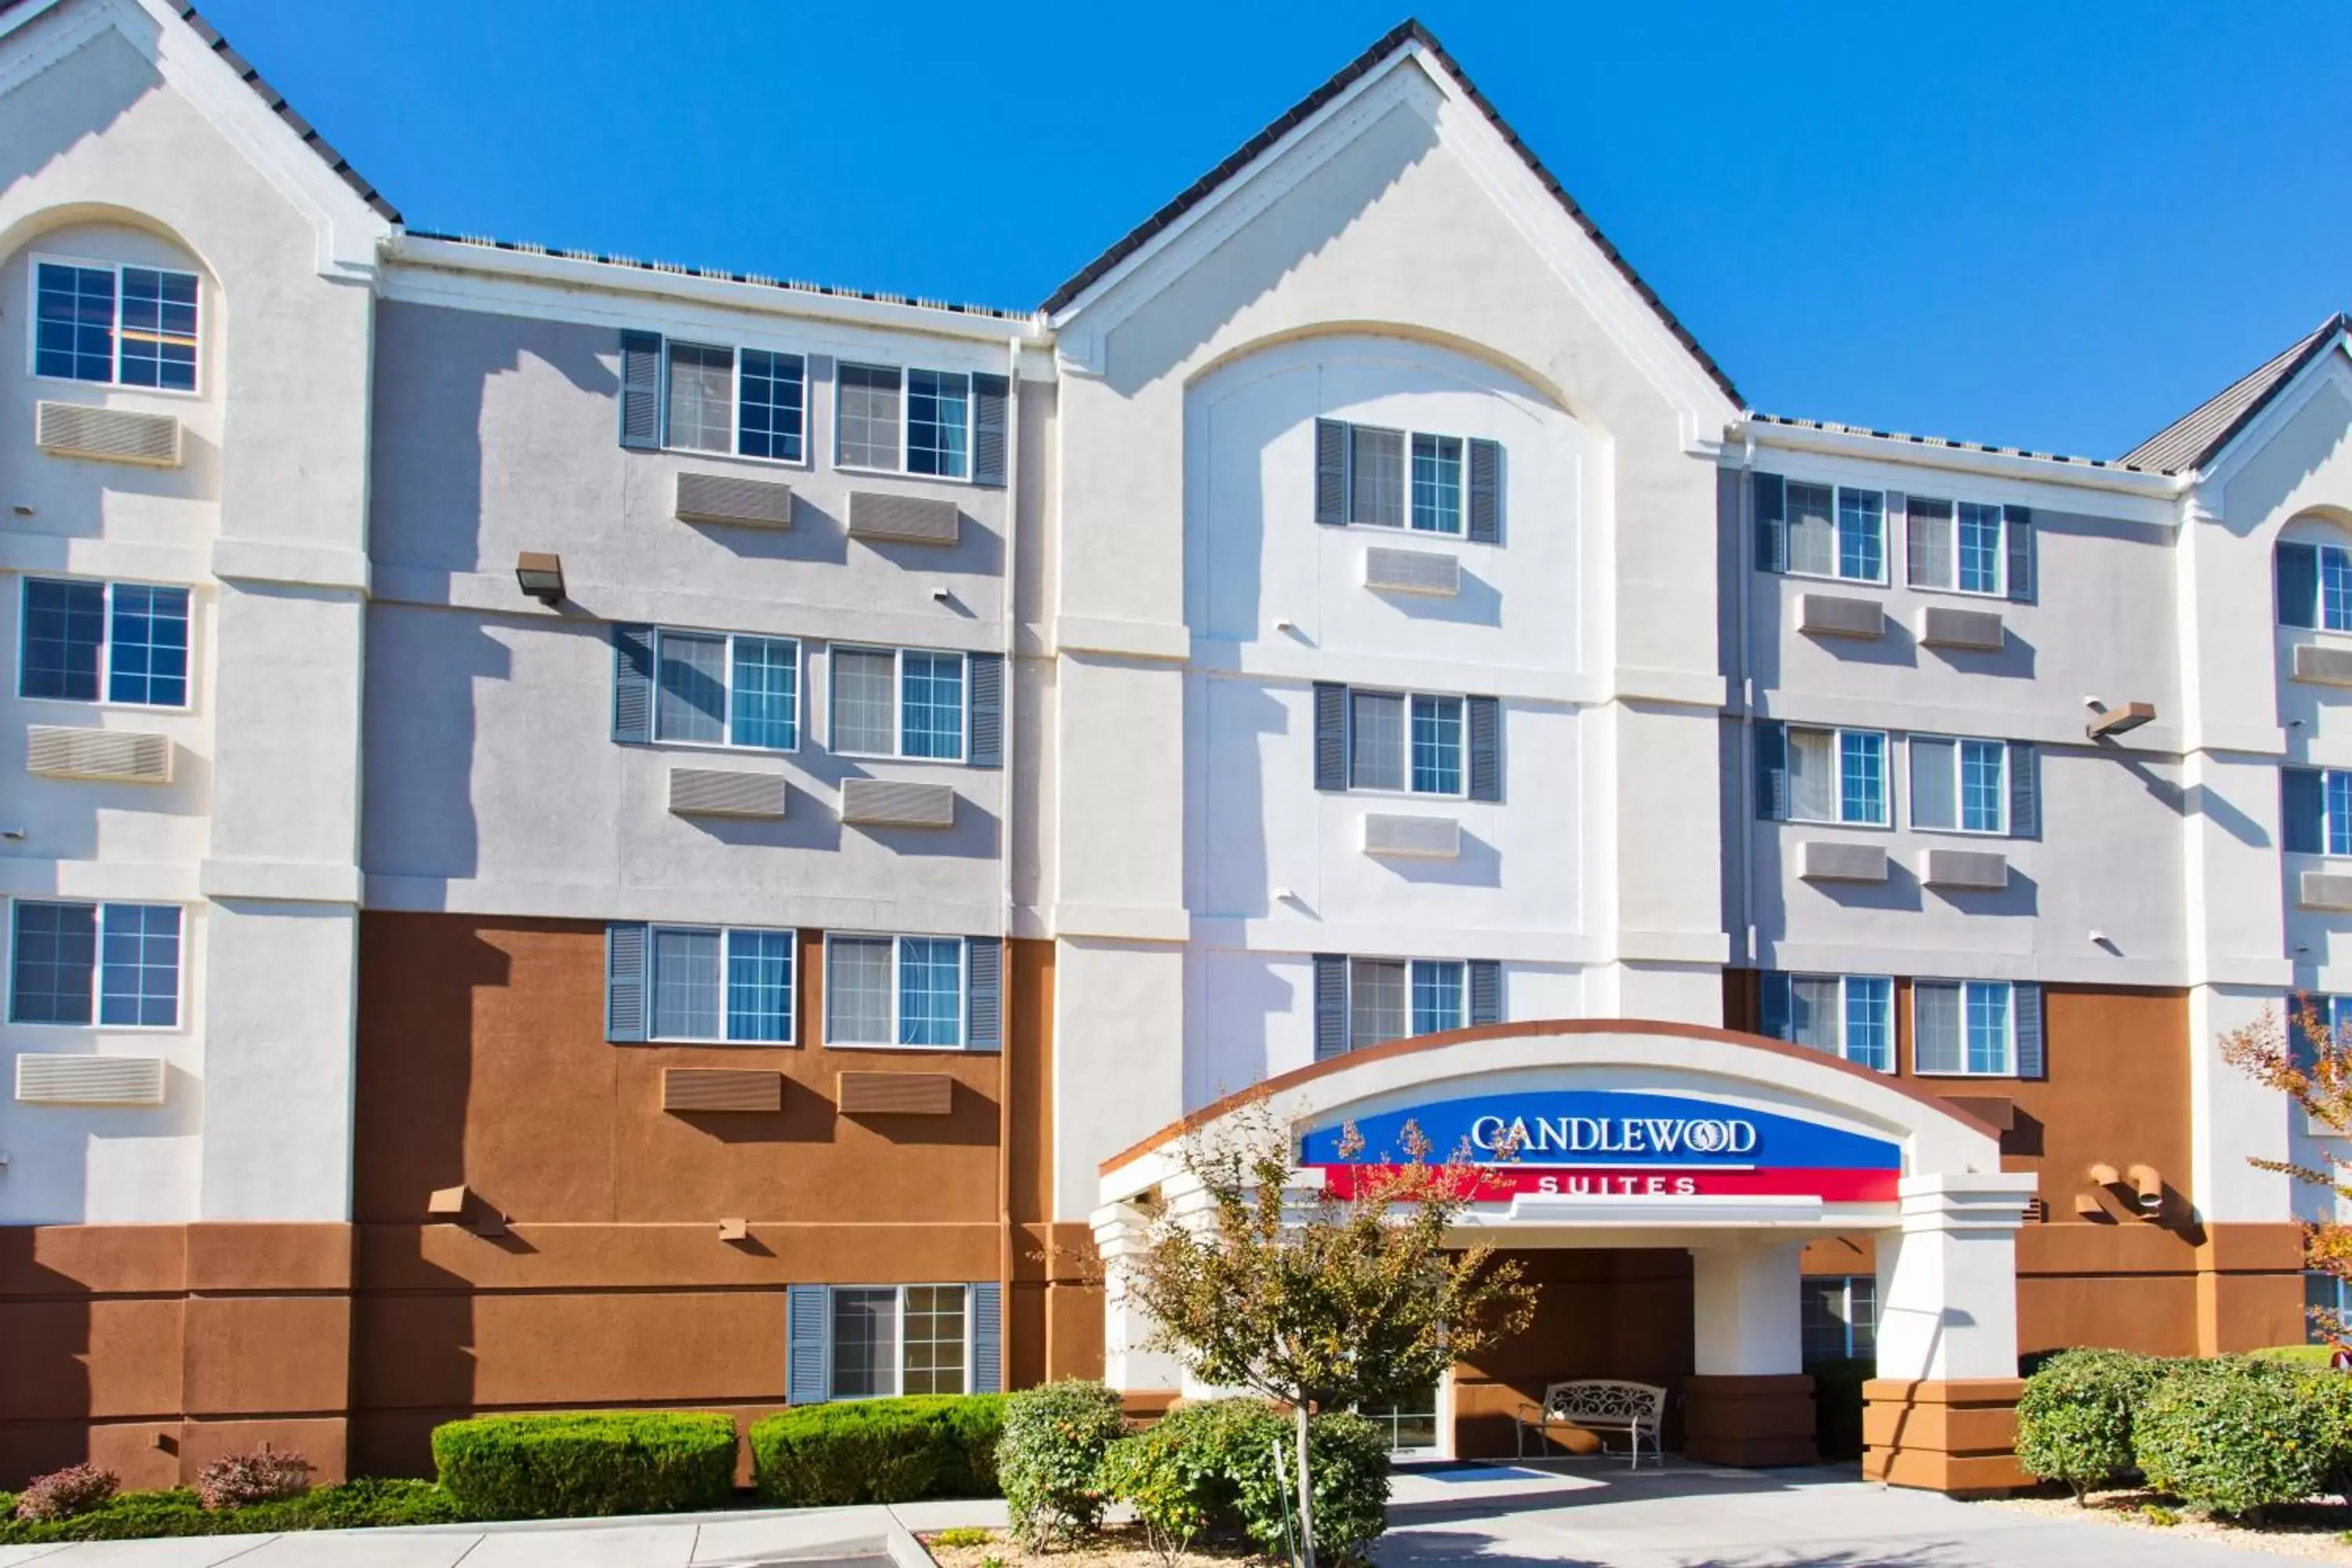 Property building in Candlewood Suites Medford, an IHG Hotel